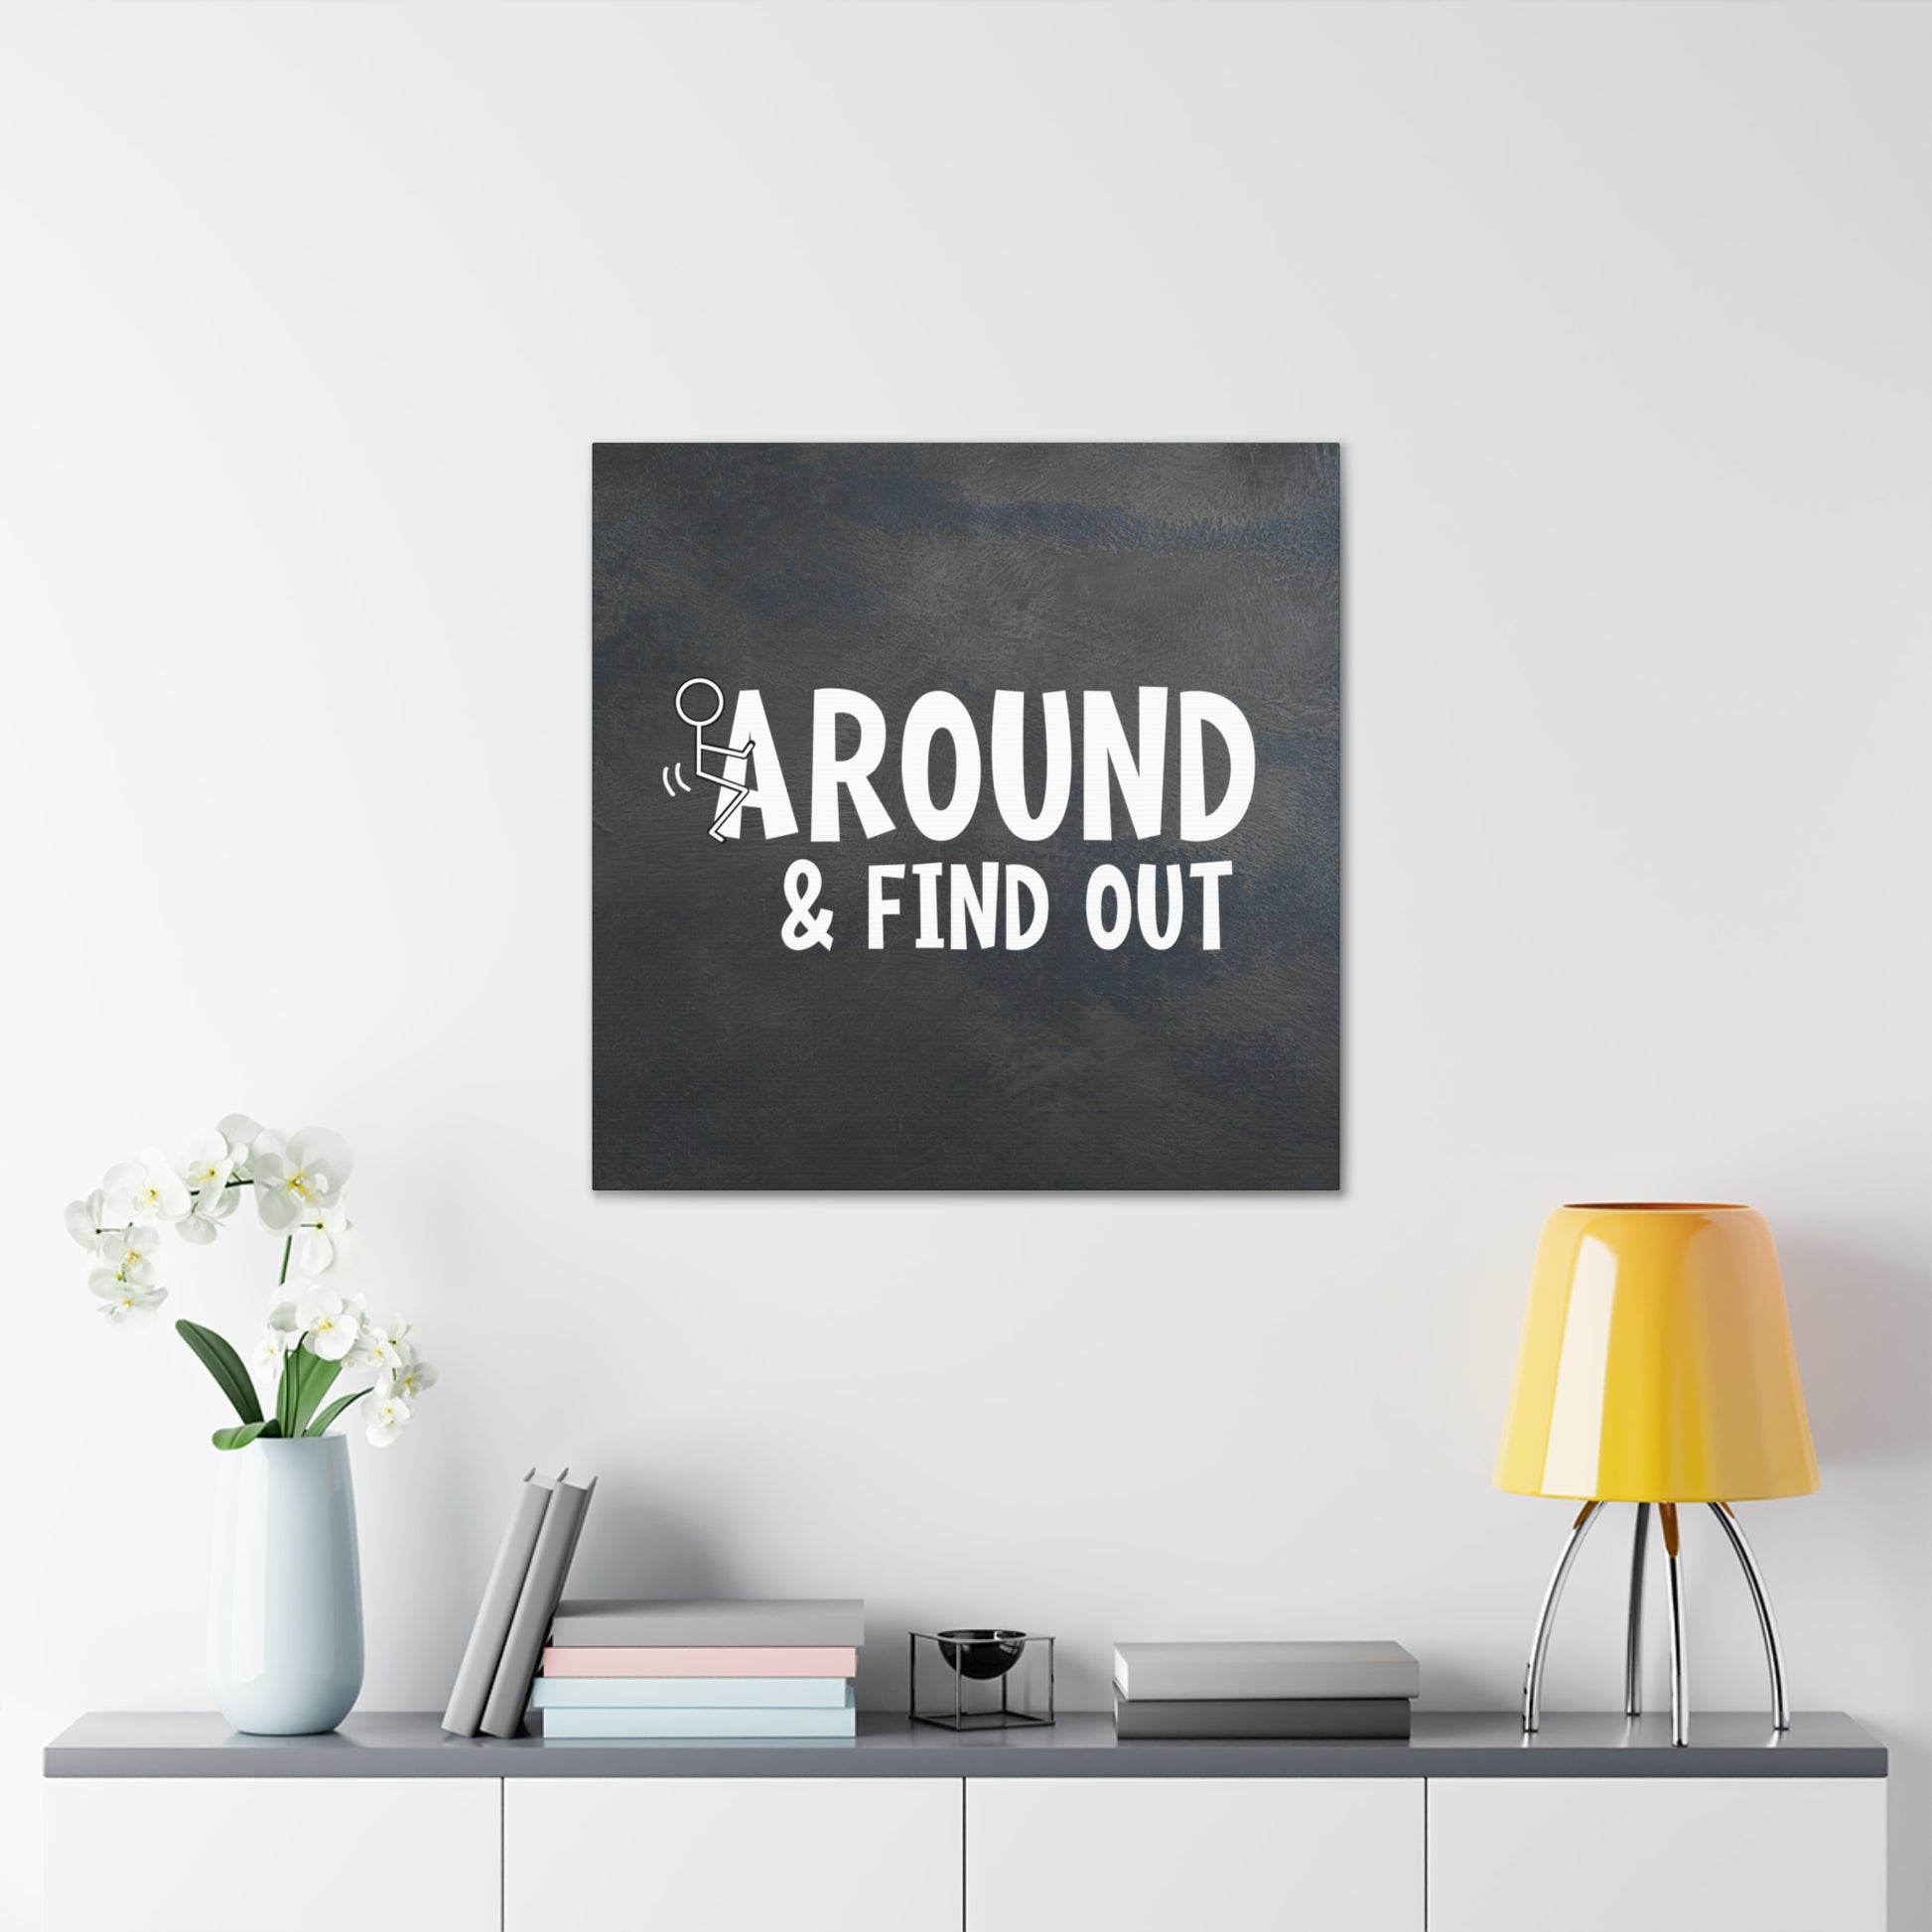 "F Around & Find Out" Adult Wall Art - Weave Got Gifts - Unique Gifts You Won’t Find Anywhere Else!